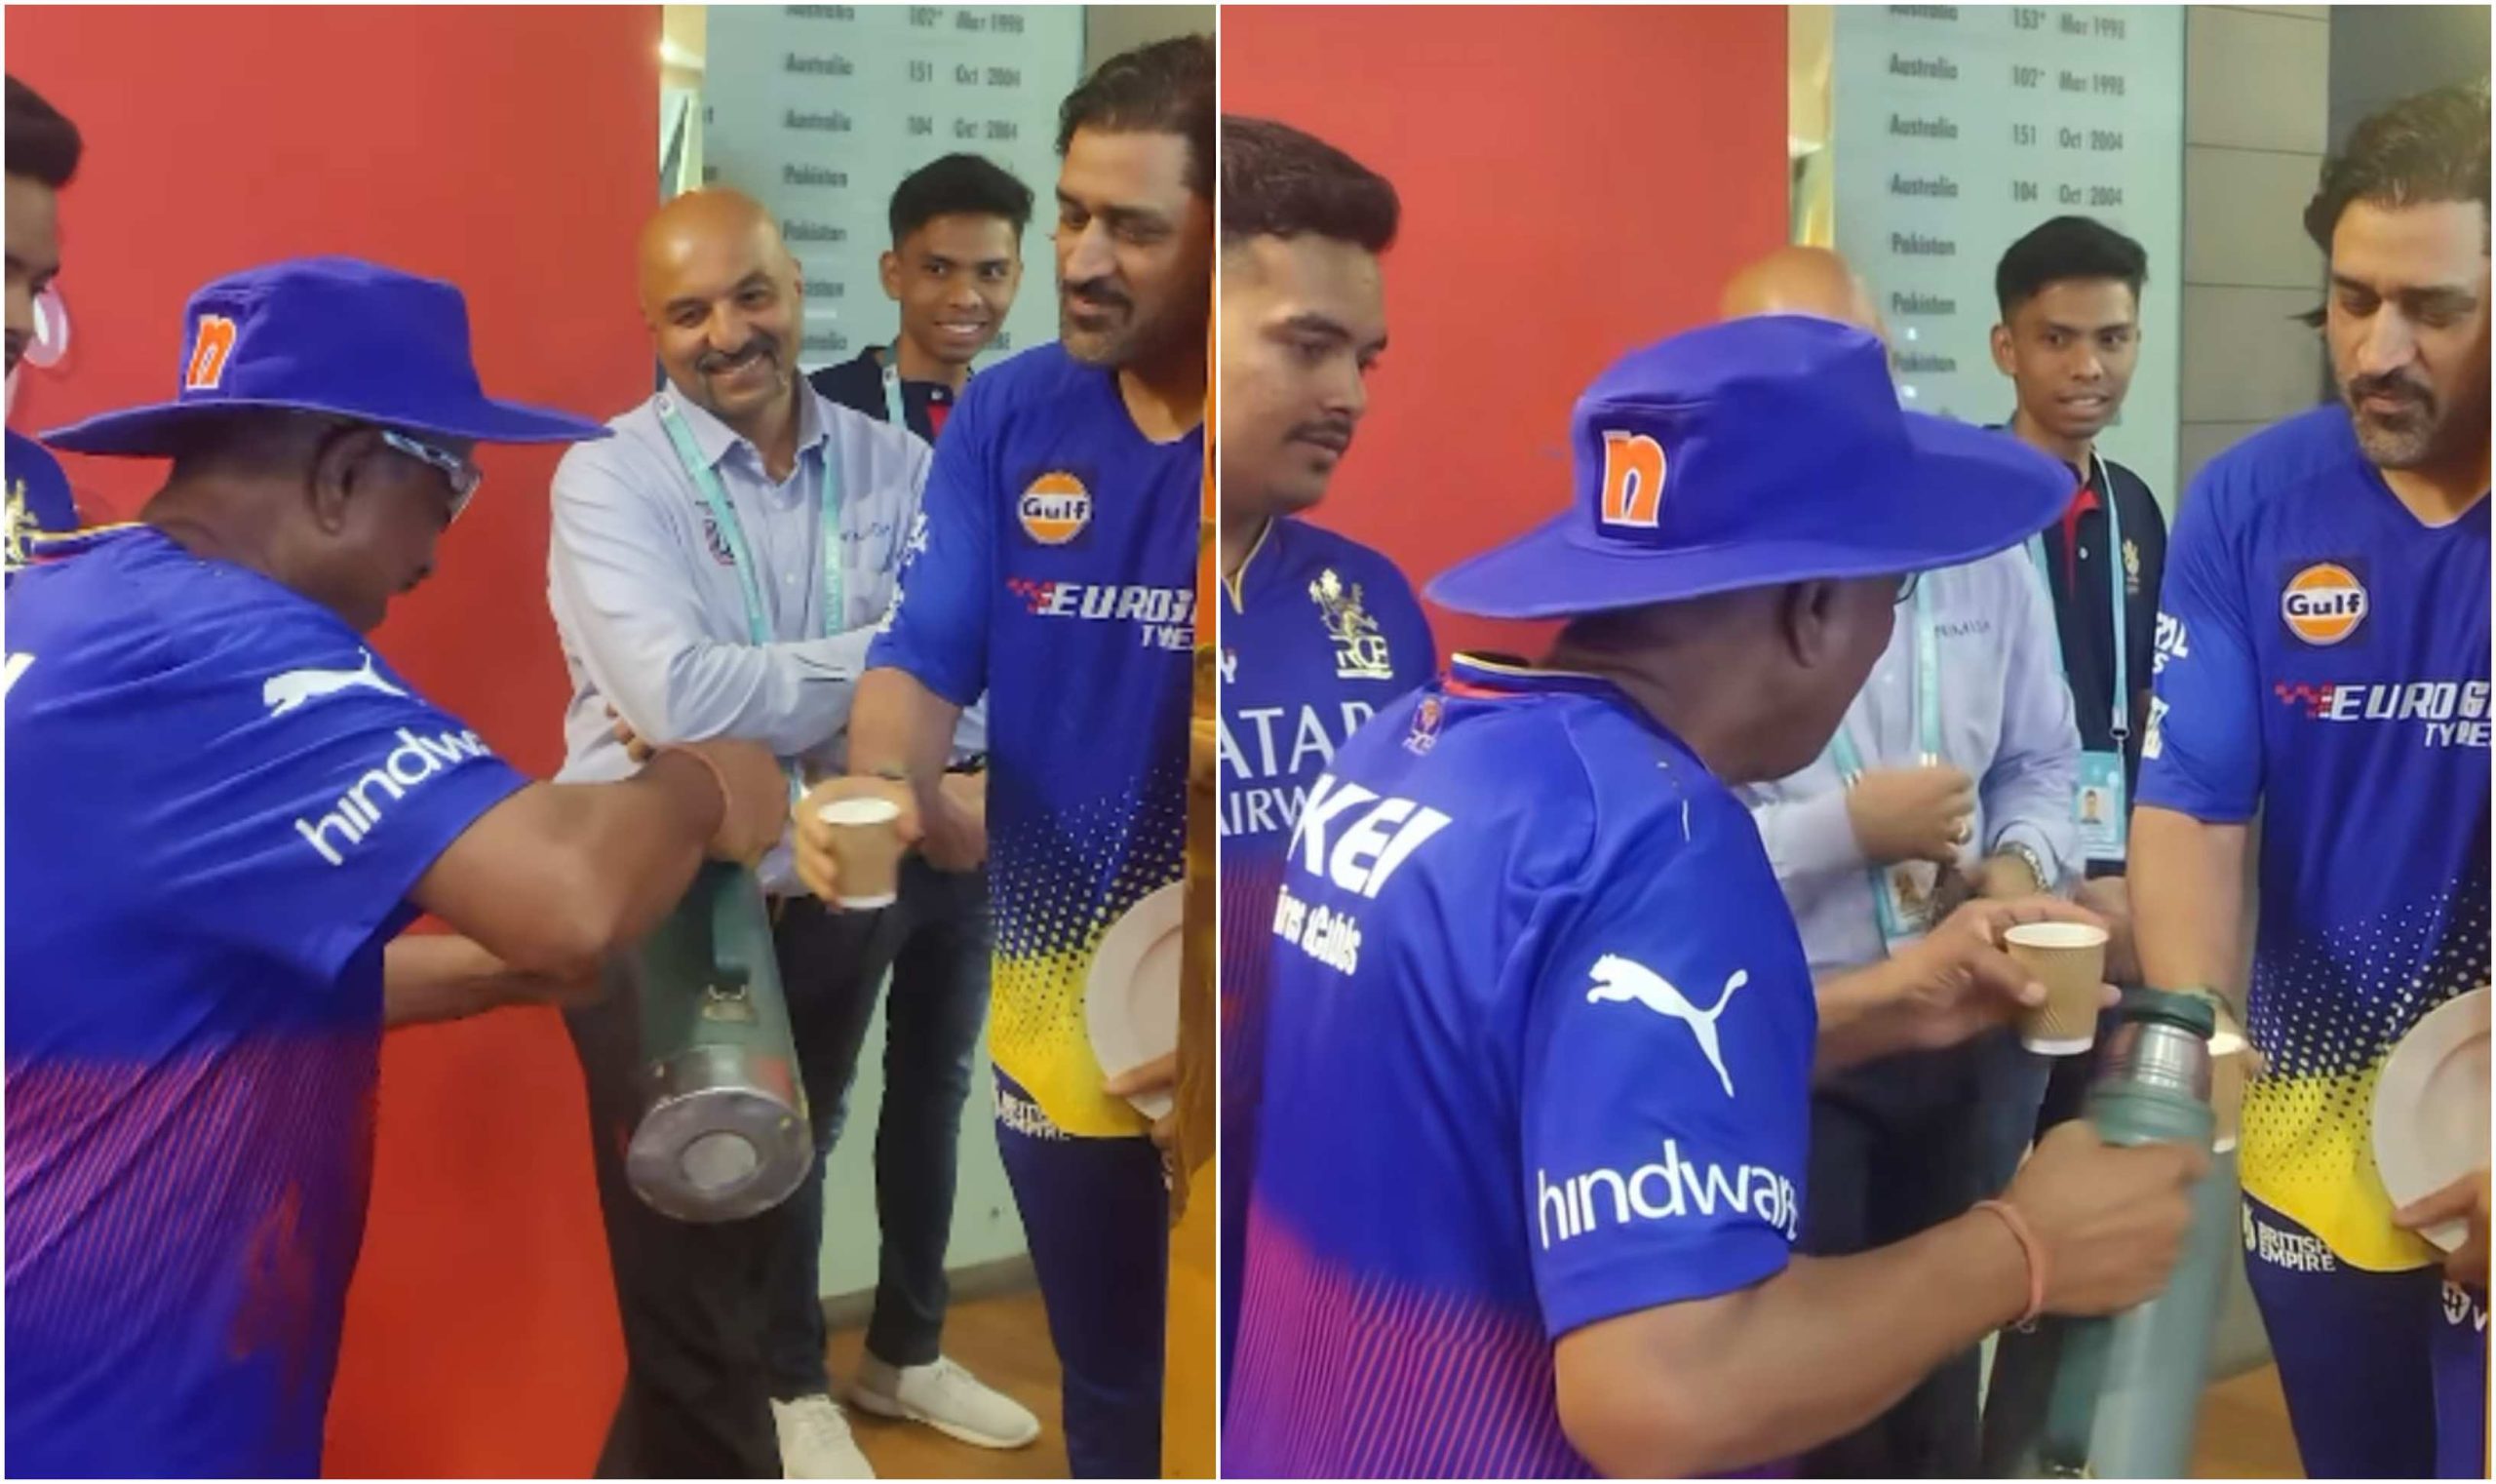 [WATCH]- MS Dhoni Visits The RCB Dressing Room And Receives A Warm Greeting With A Hot Cup Of Tea